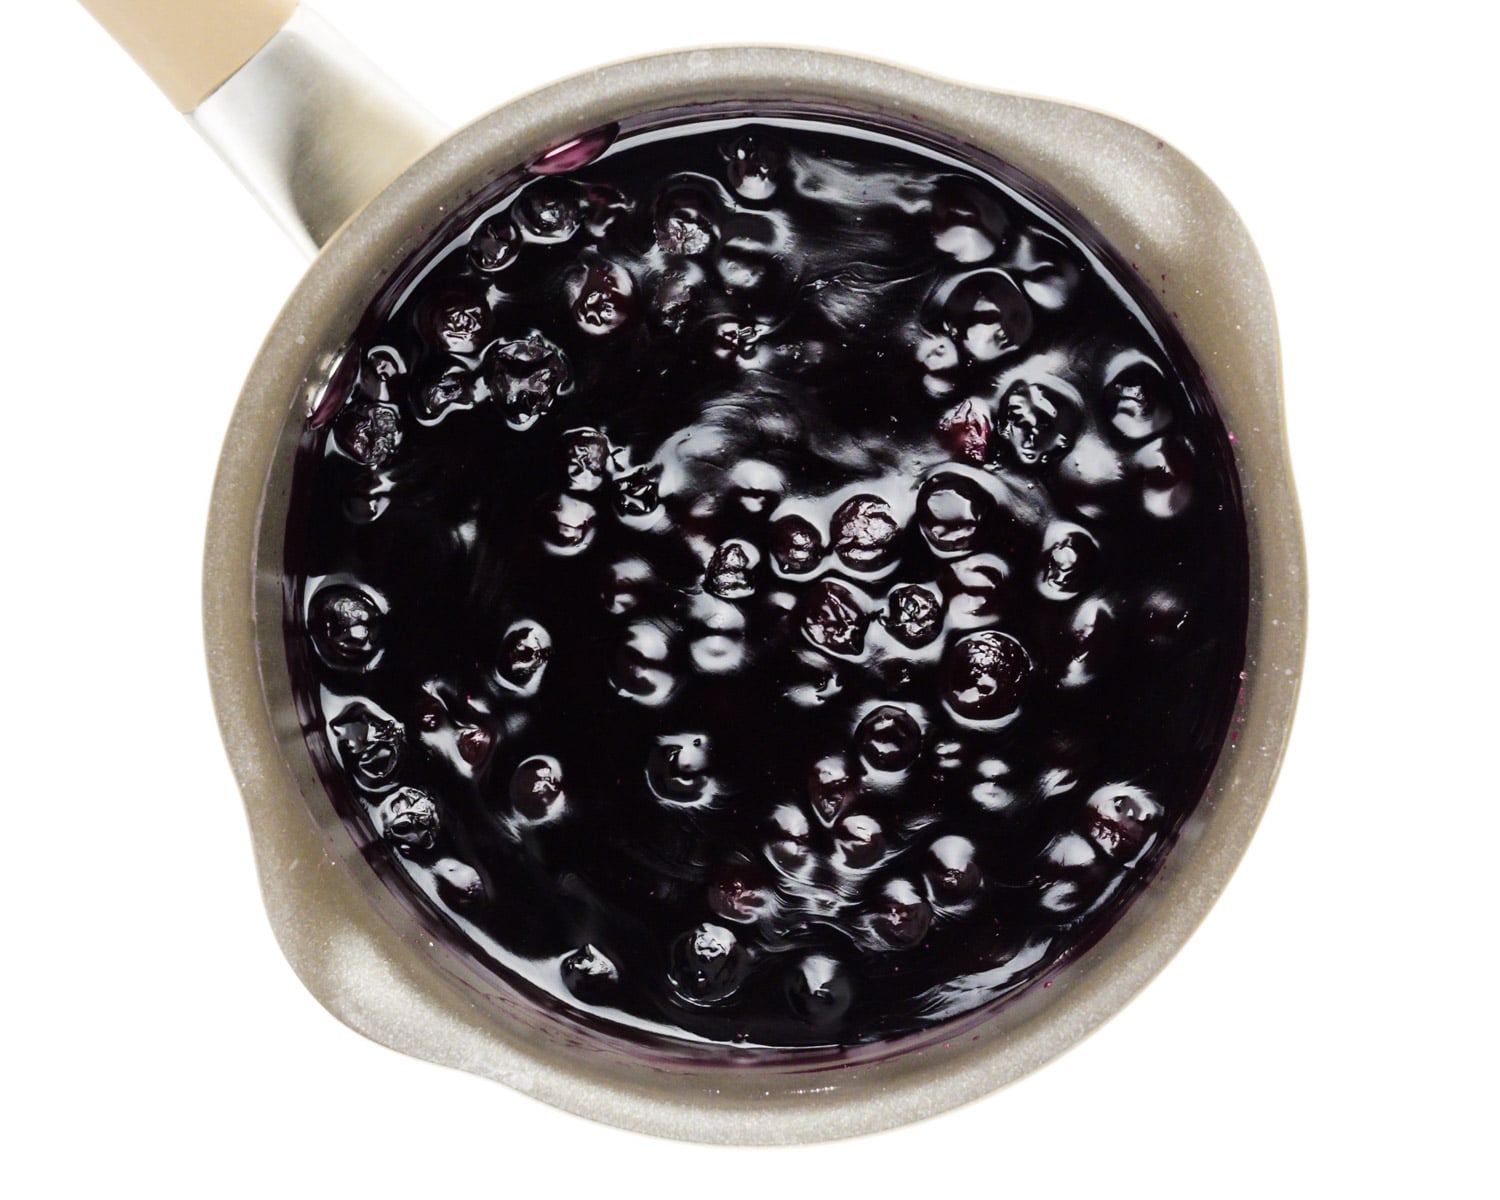 Blueberry sauce is cooking in a saucepan.